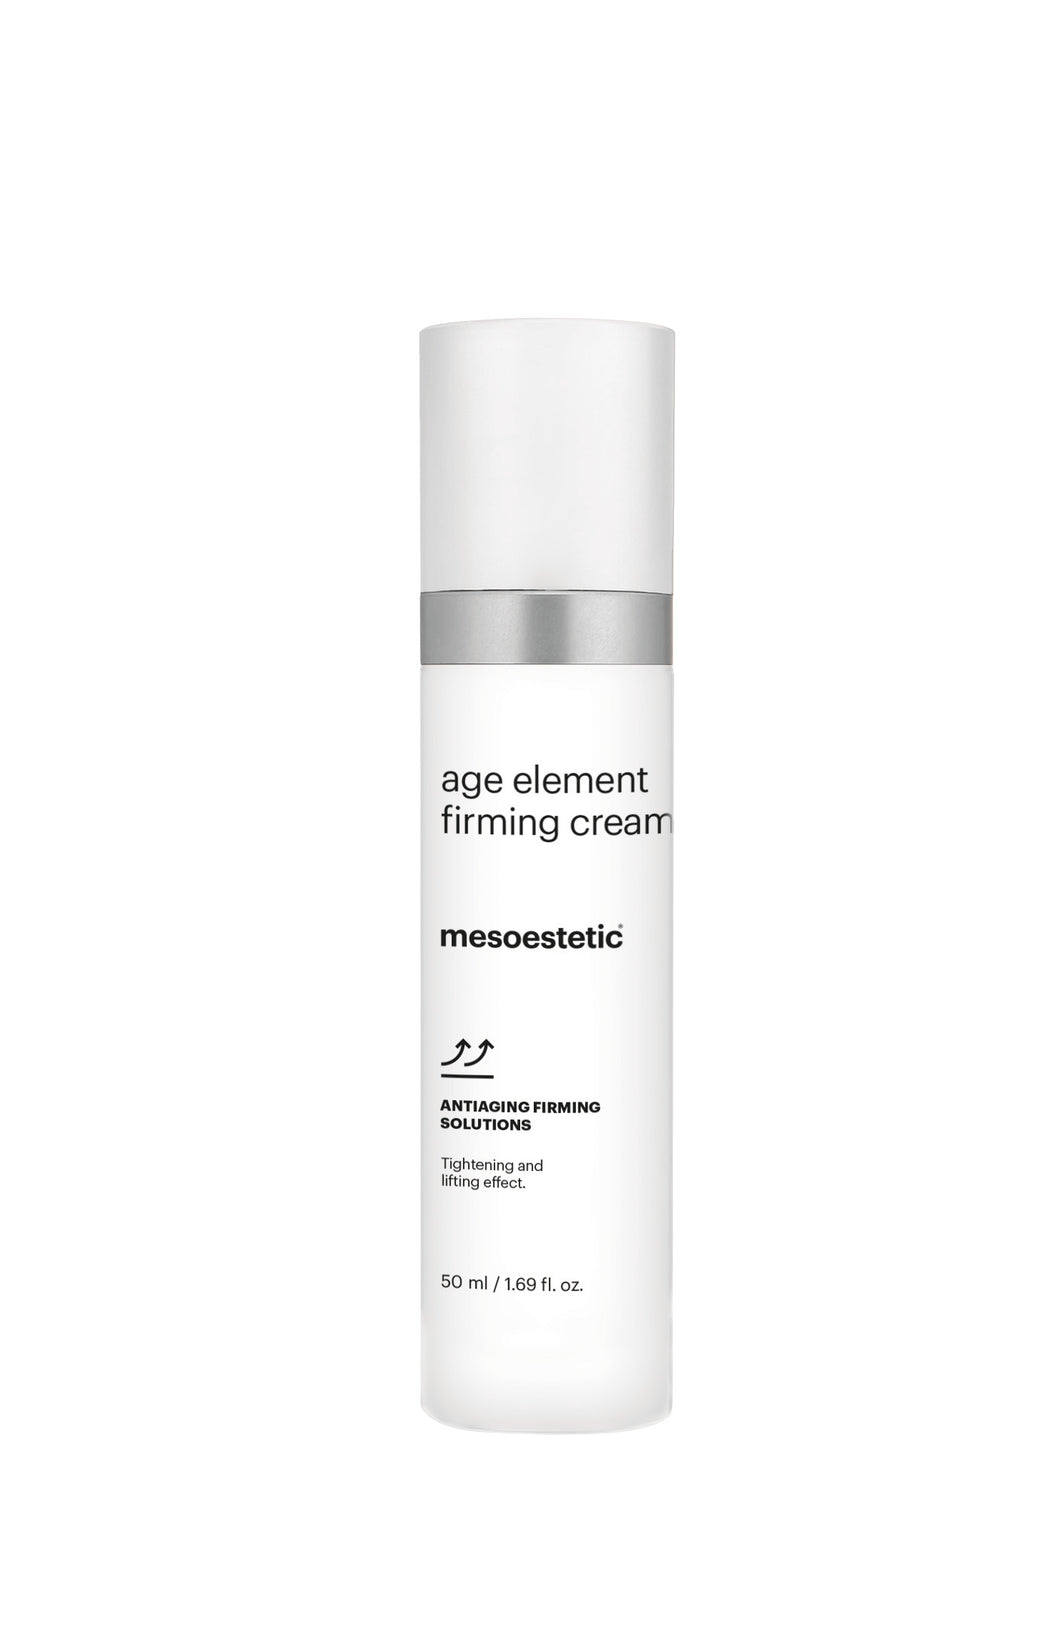 Mesoestetic Age Element firming cream